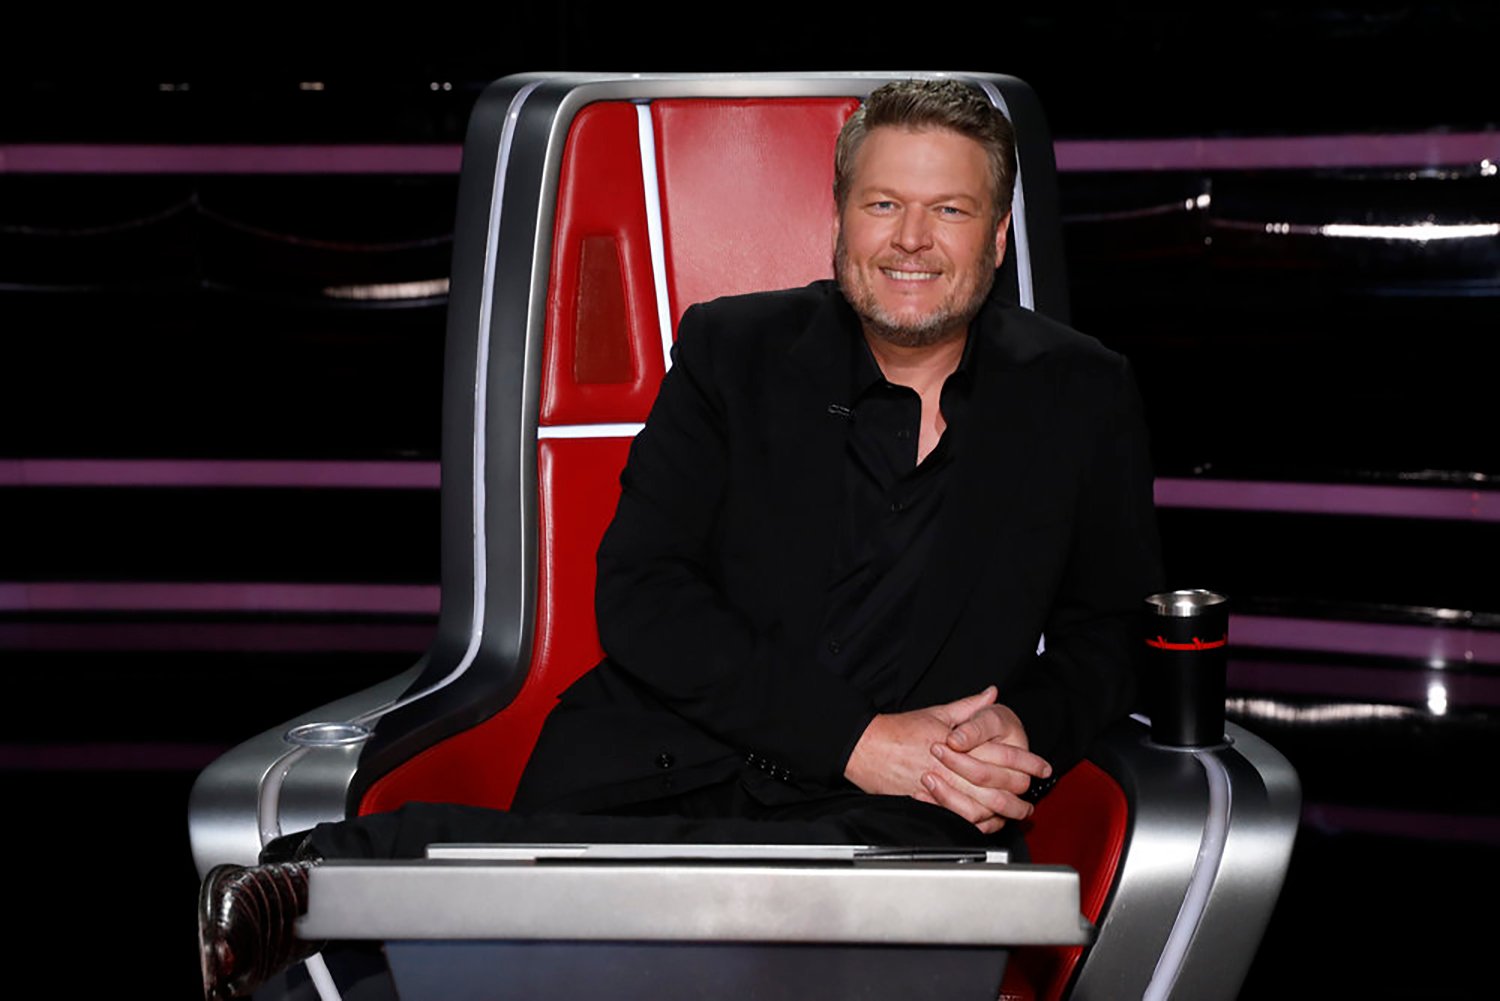 Blake Shelton smiles in his seat on The Voice Season 22 one night before he wins..